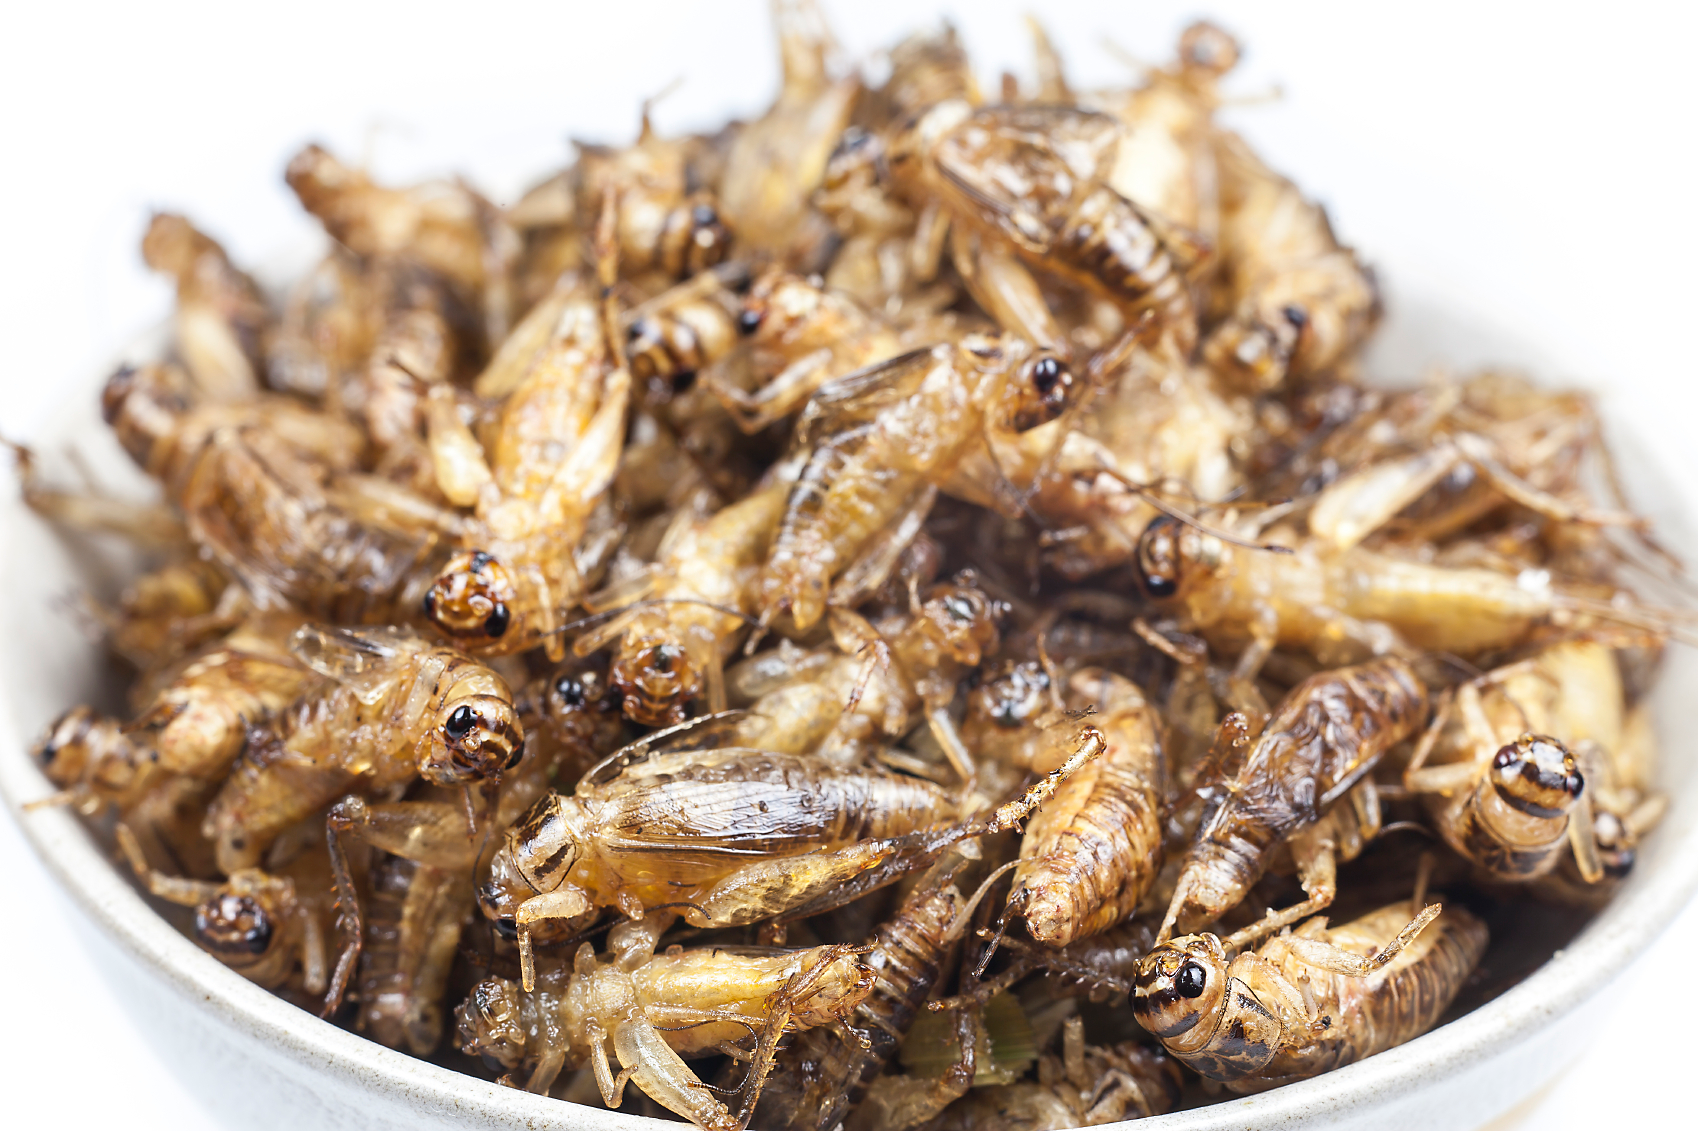 ter-insects-food_%20cricket_0050